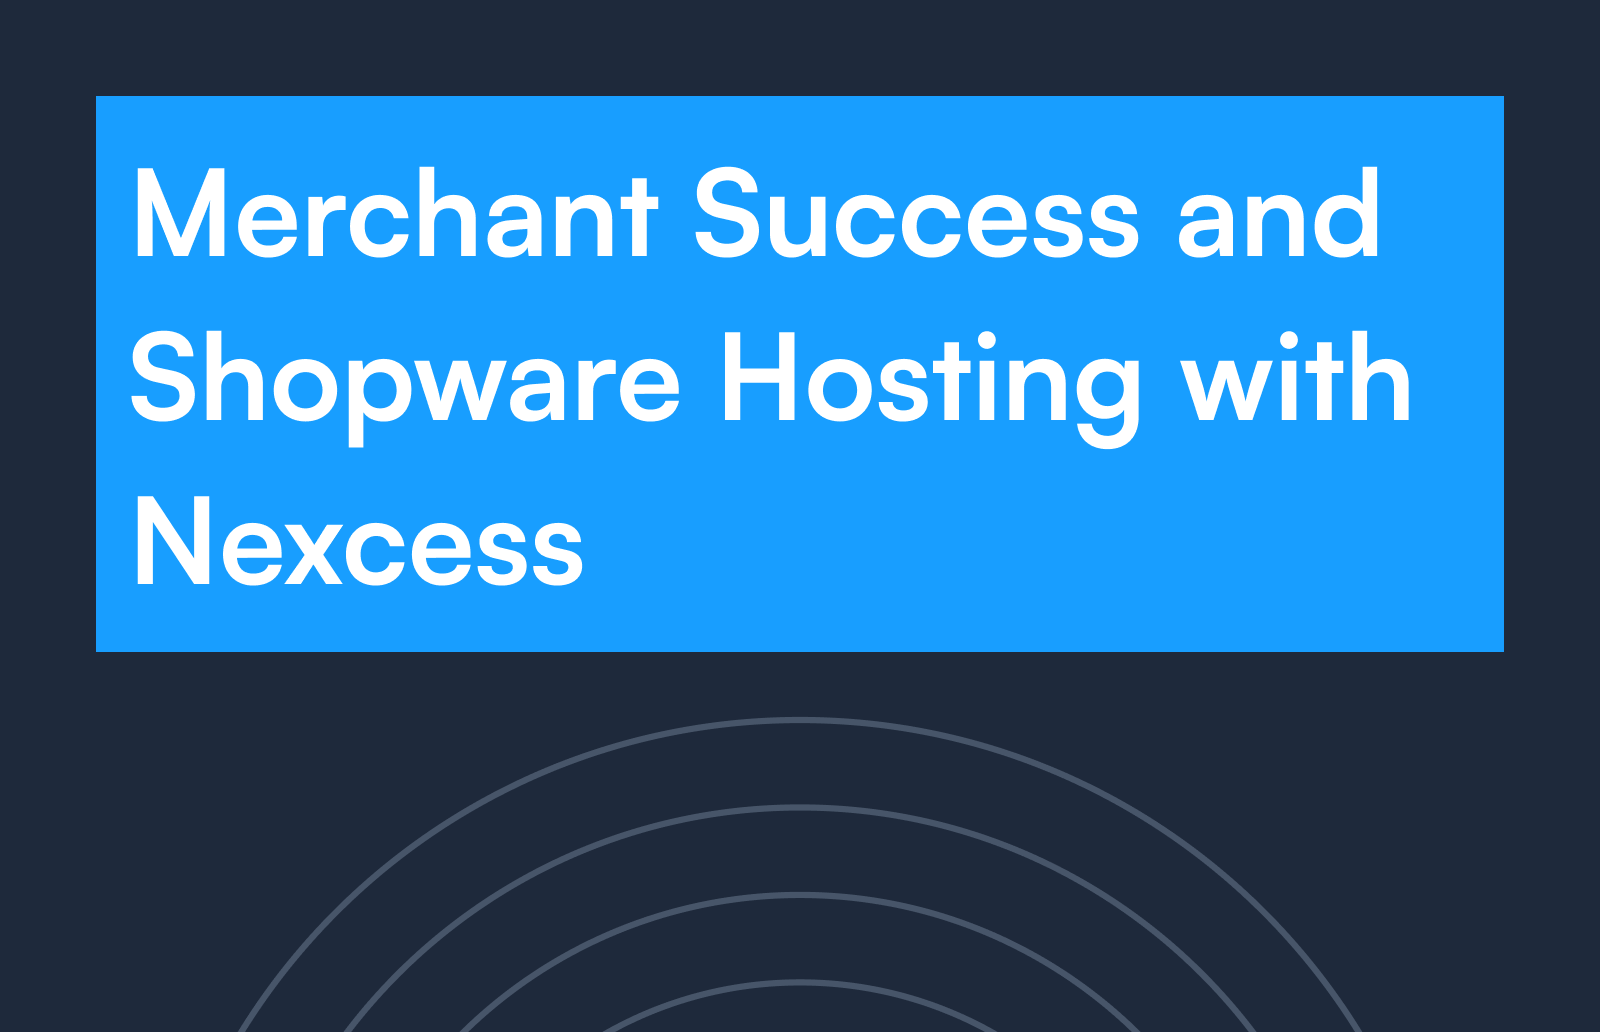 Merchant Success and Shopware Hosting with Nexcess